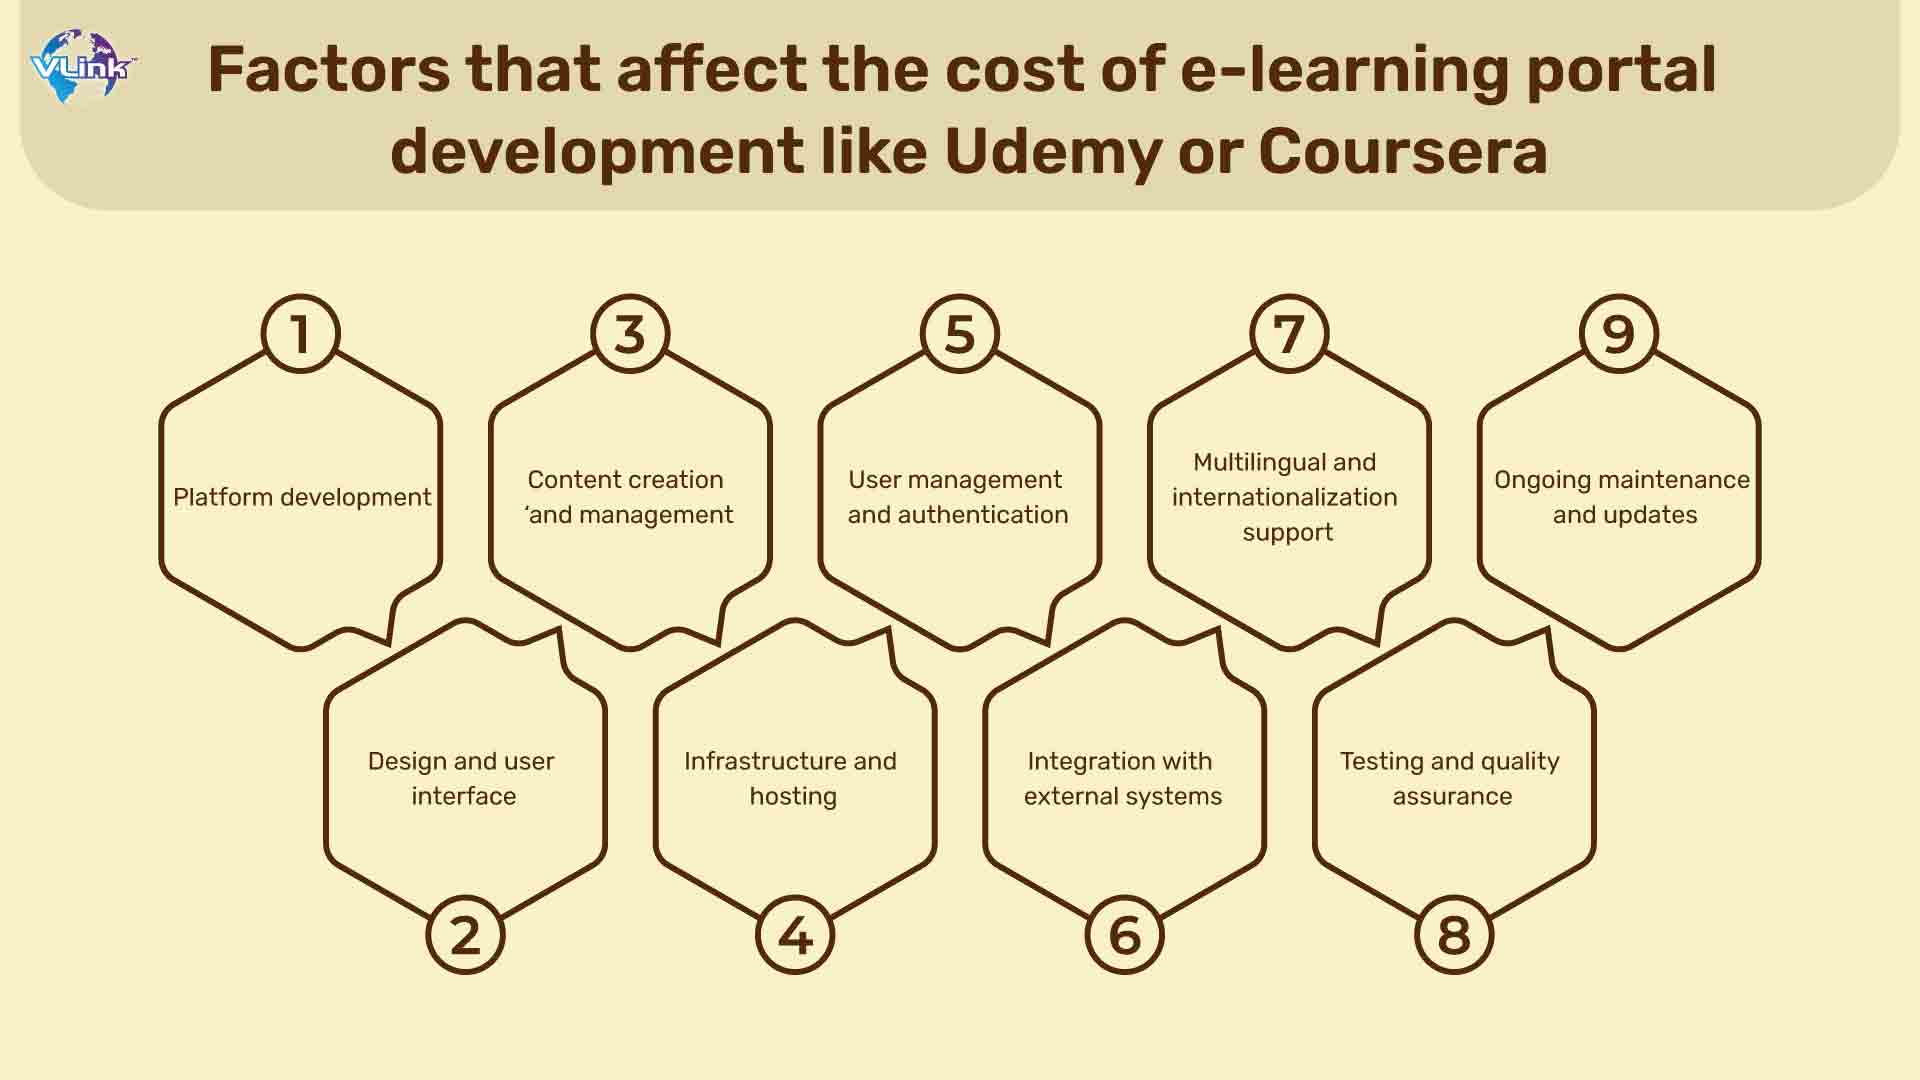 Factors that Affect the Cost of Building an e-learning portal like Udemy or Coursera